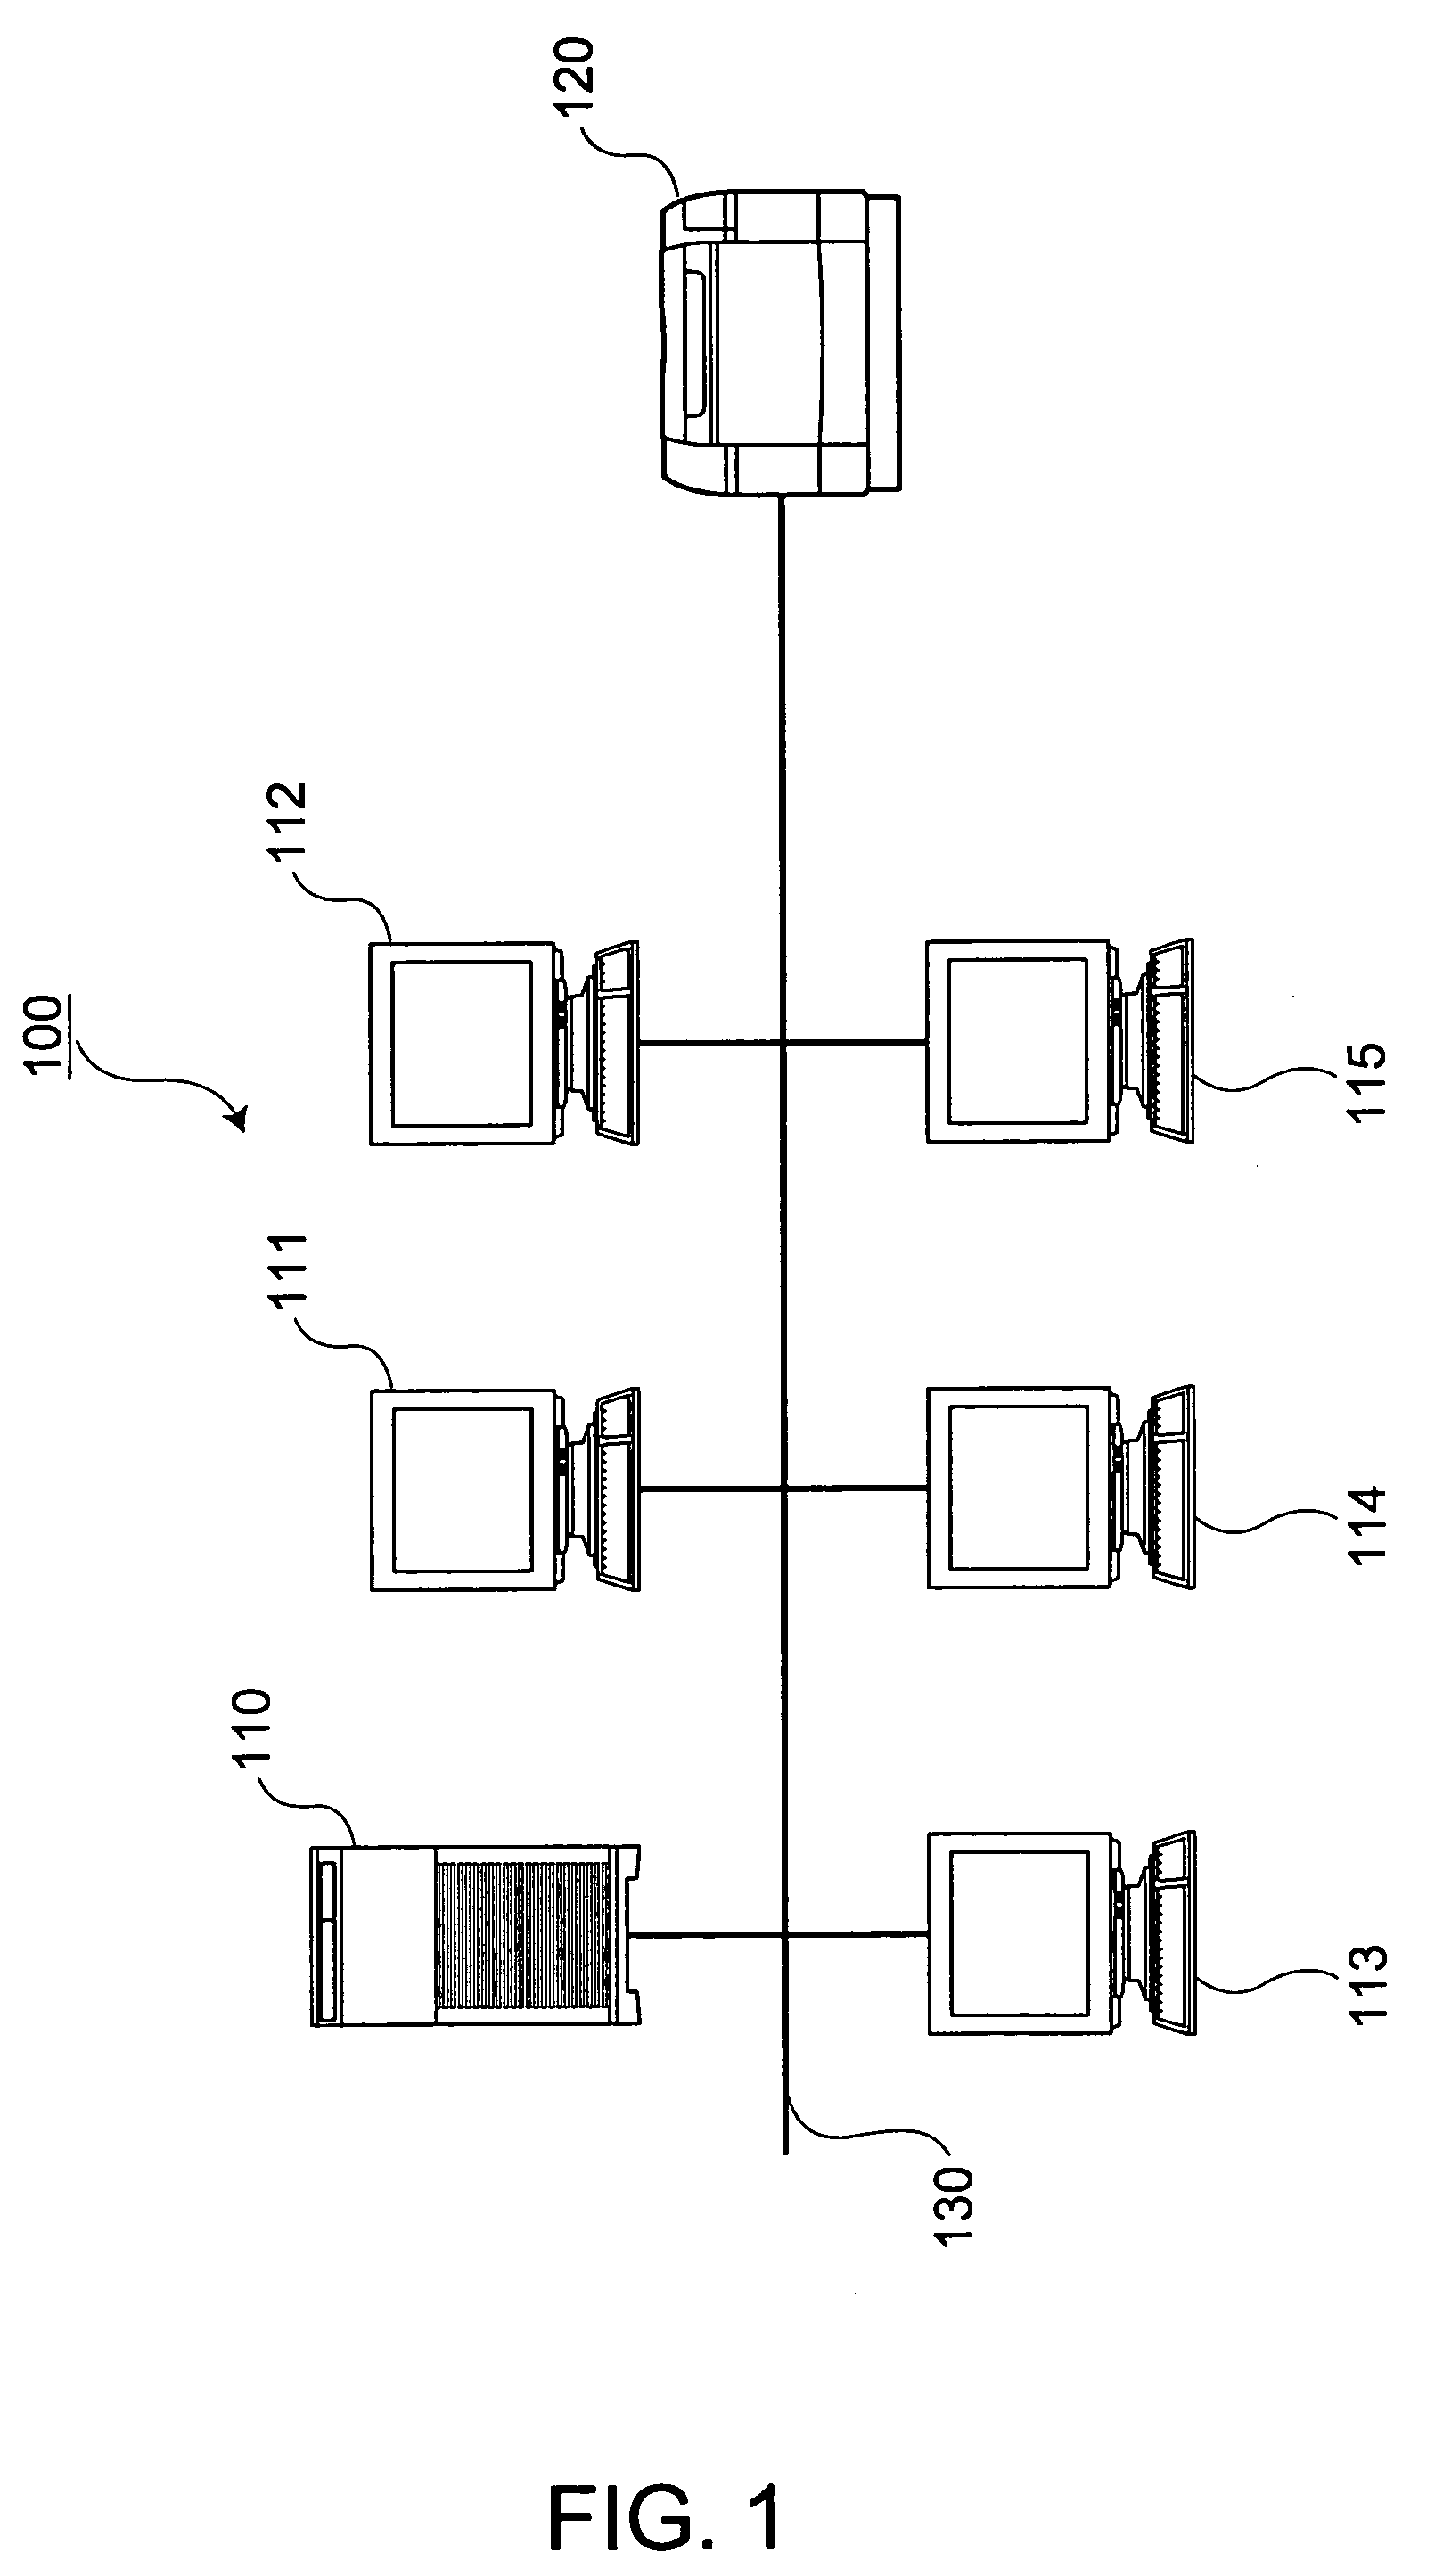 Printer with automatic acquisition and printing of network address